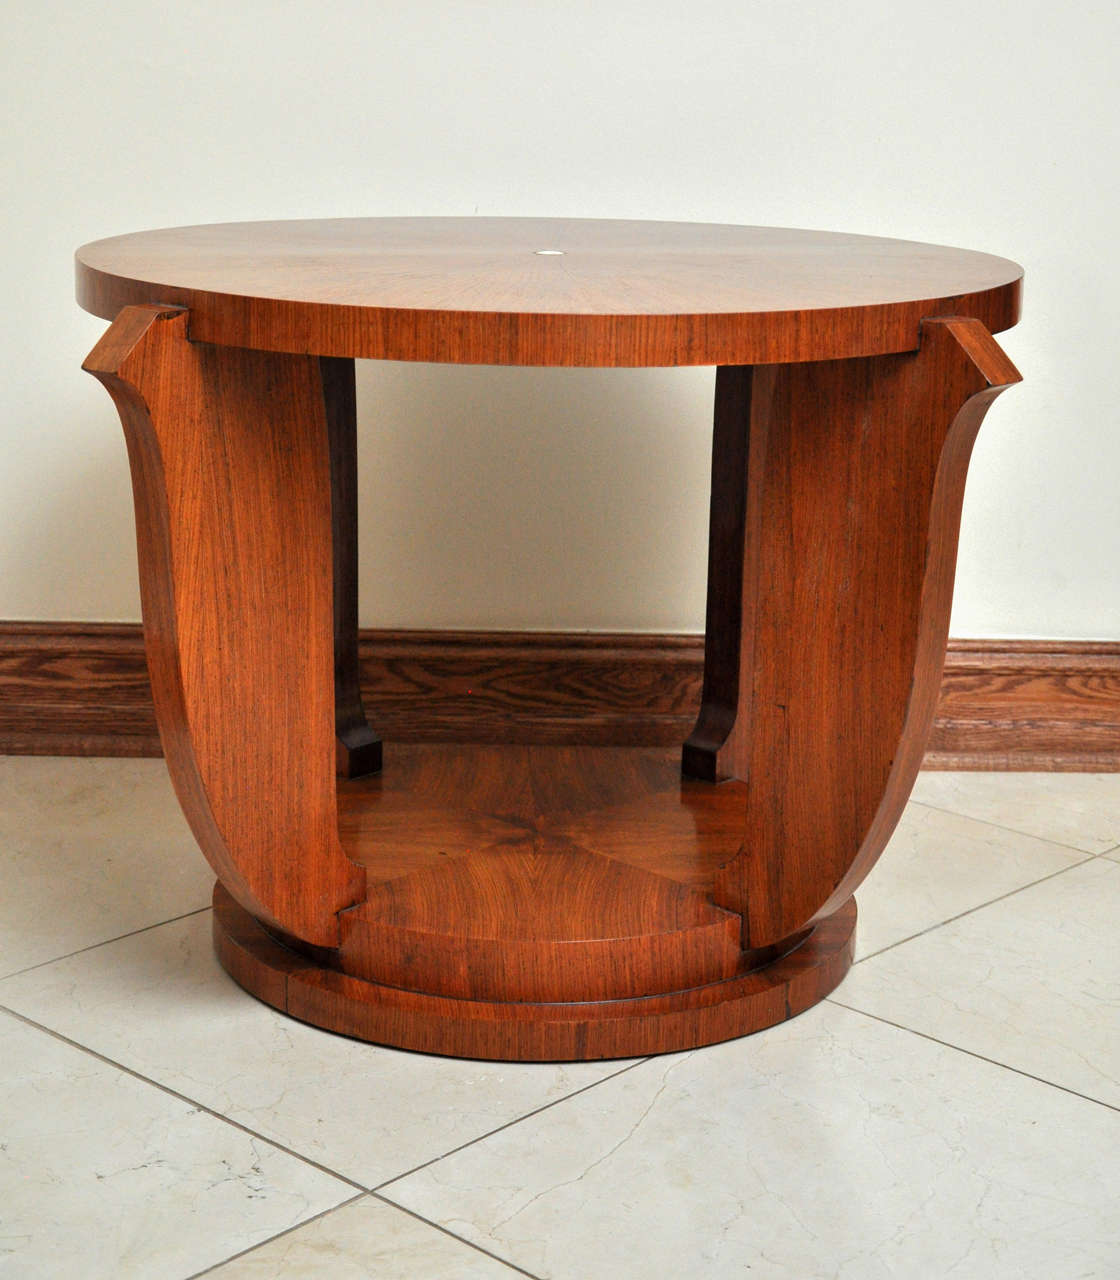 An exceptional example of Art Deco design attributed to Jules Leleu, this table features a well-figured starburst rosewood veneer, contrasted by a mother-of-pearl inlay accent. Its circular top is echoed on the stepped, round base. The supporting